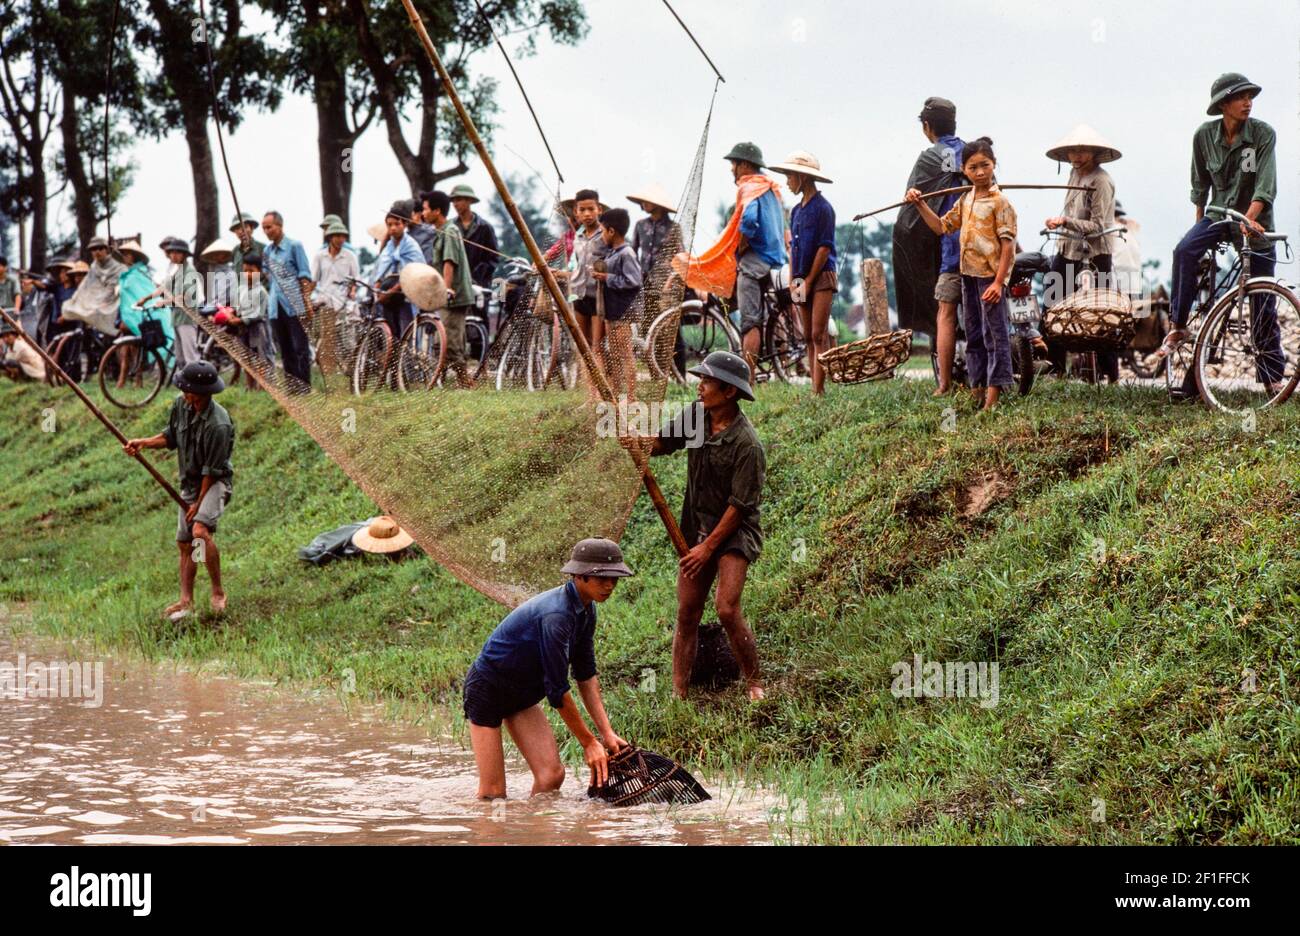 Villagers fishing in the fish ponds with nets and fishing baskets, rural South Vietnam, June 1980 Stock Photo